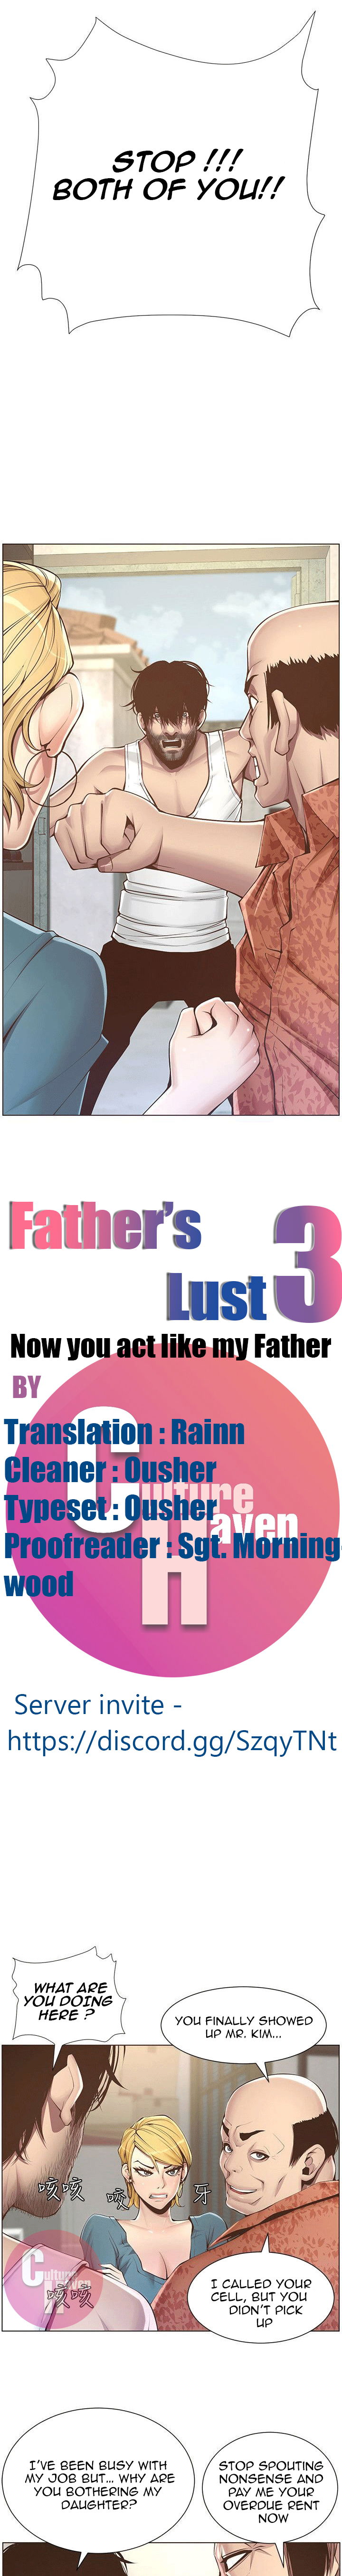 fathers-lust-chap-3-0